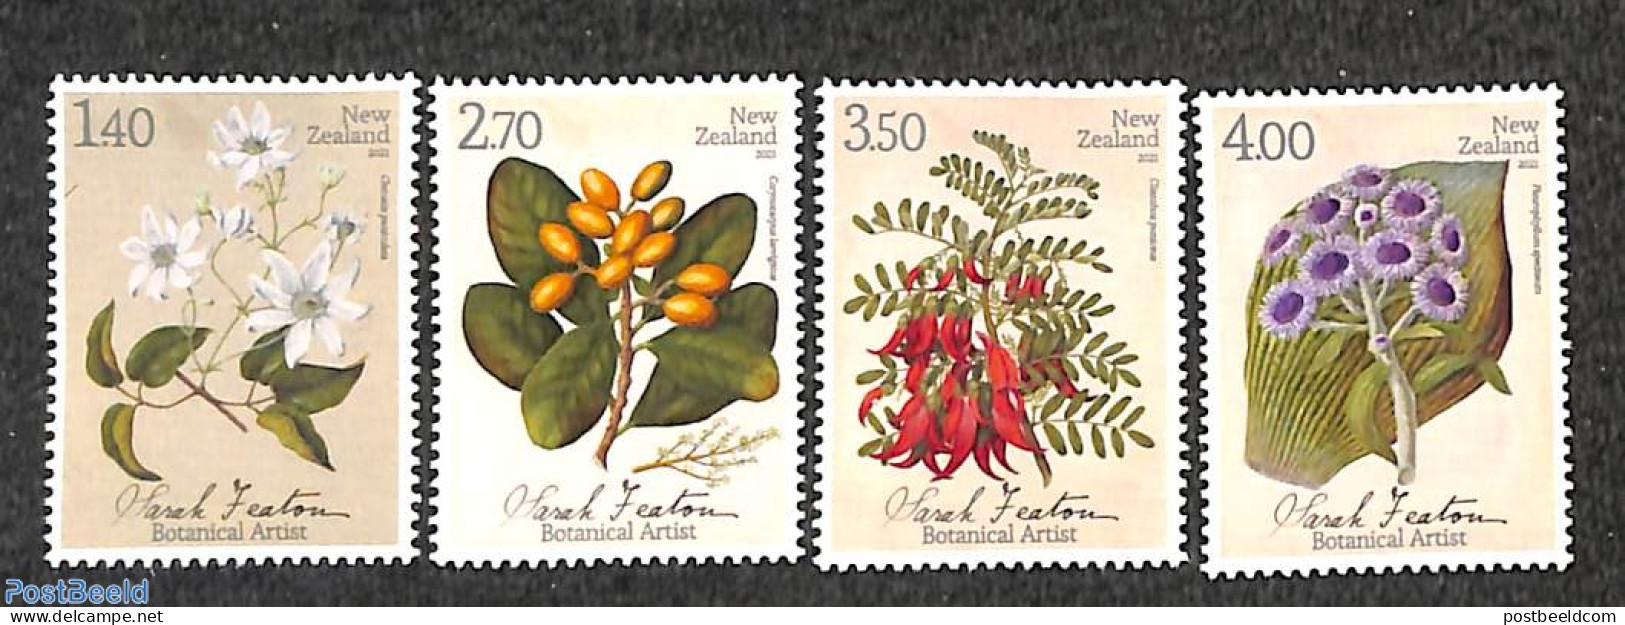 New Zealand 2021 Sarah Featon 4v, Mint NH, Nature - Flowers & Plants - Unused Stamps